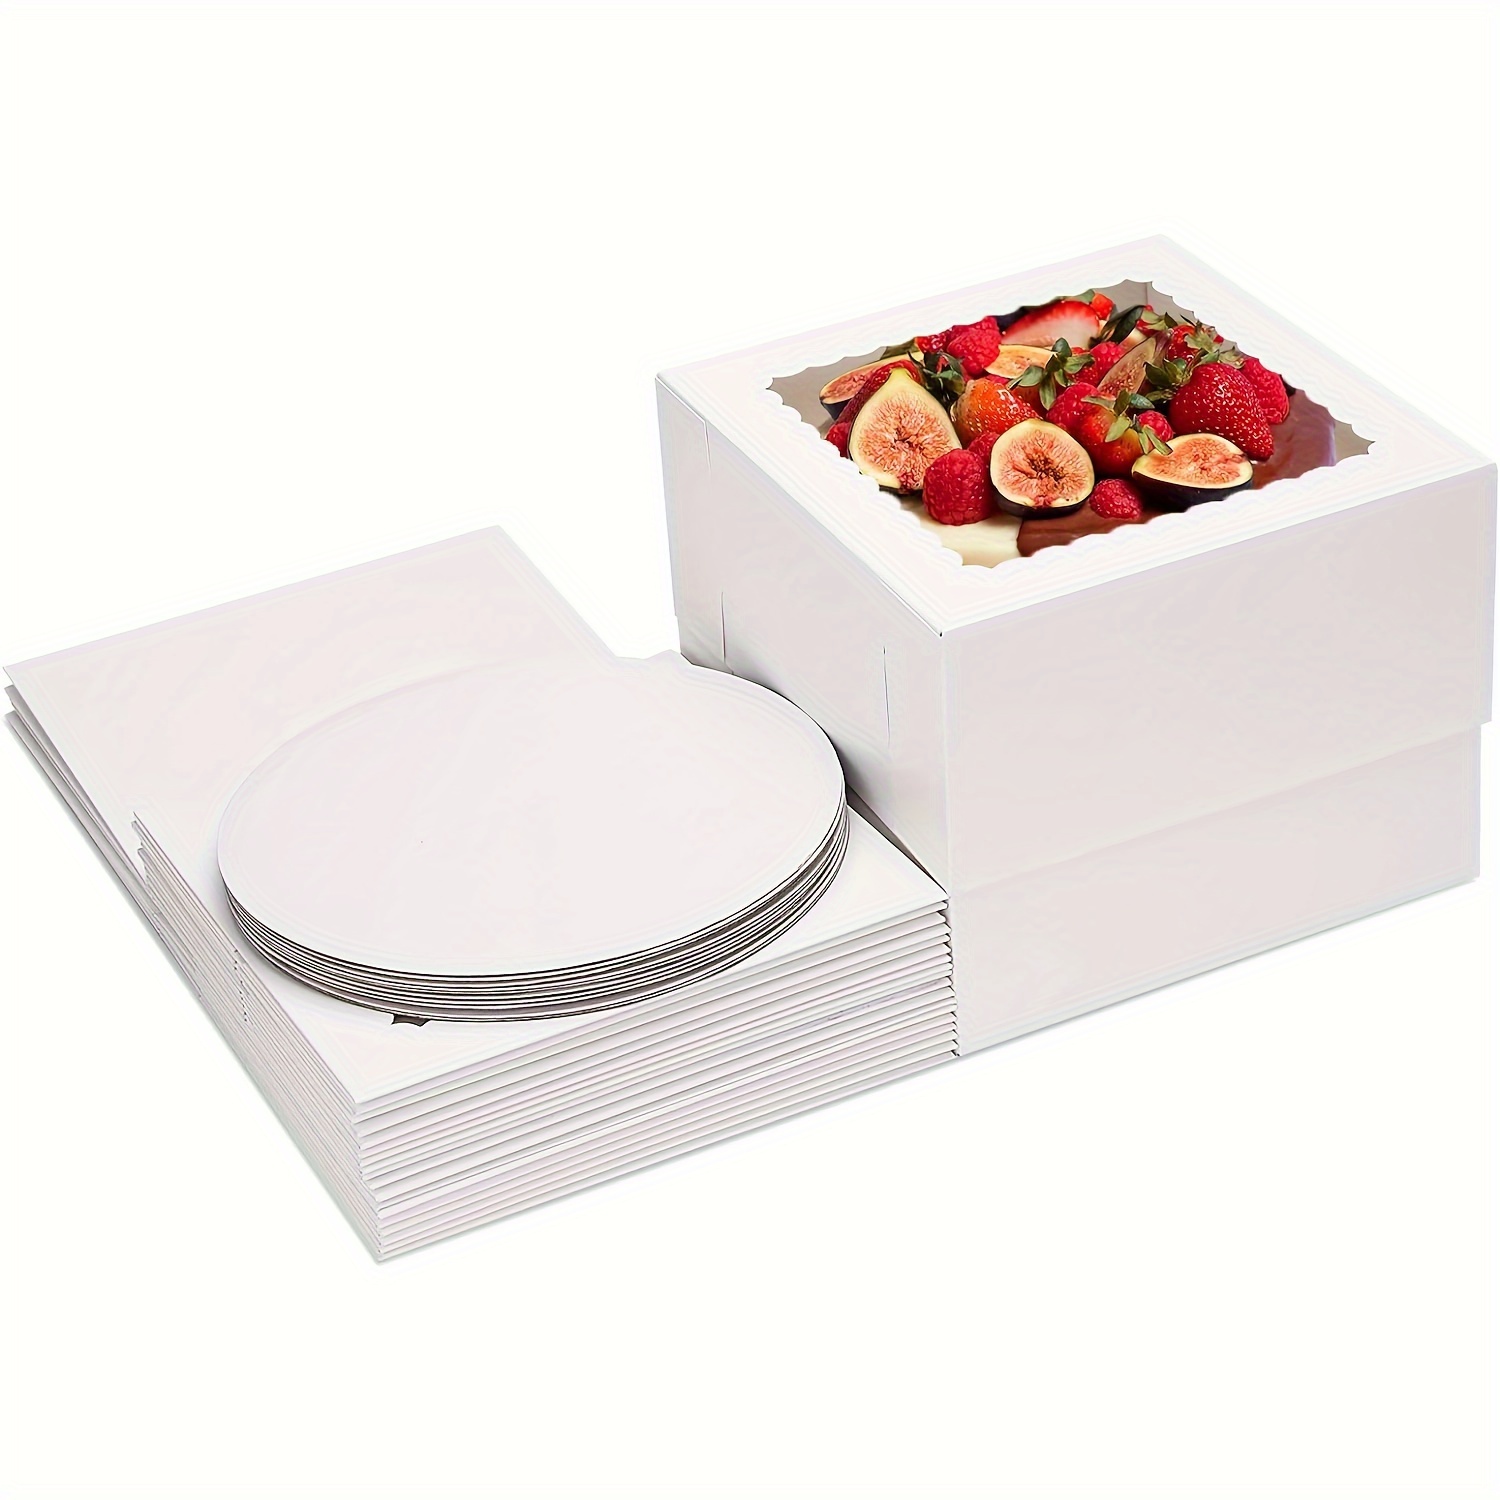 

8-pack Elegant White Cake Boxes With Window - Multi-layer Bakery Boxes For Gifts, Perfect For Christmas, Mother's Day, Graduation & More